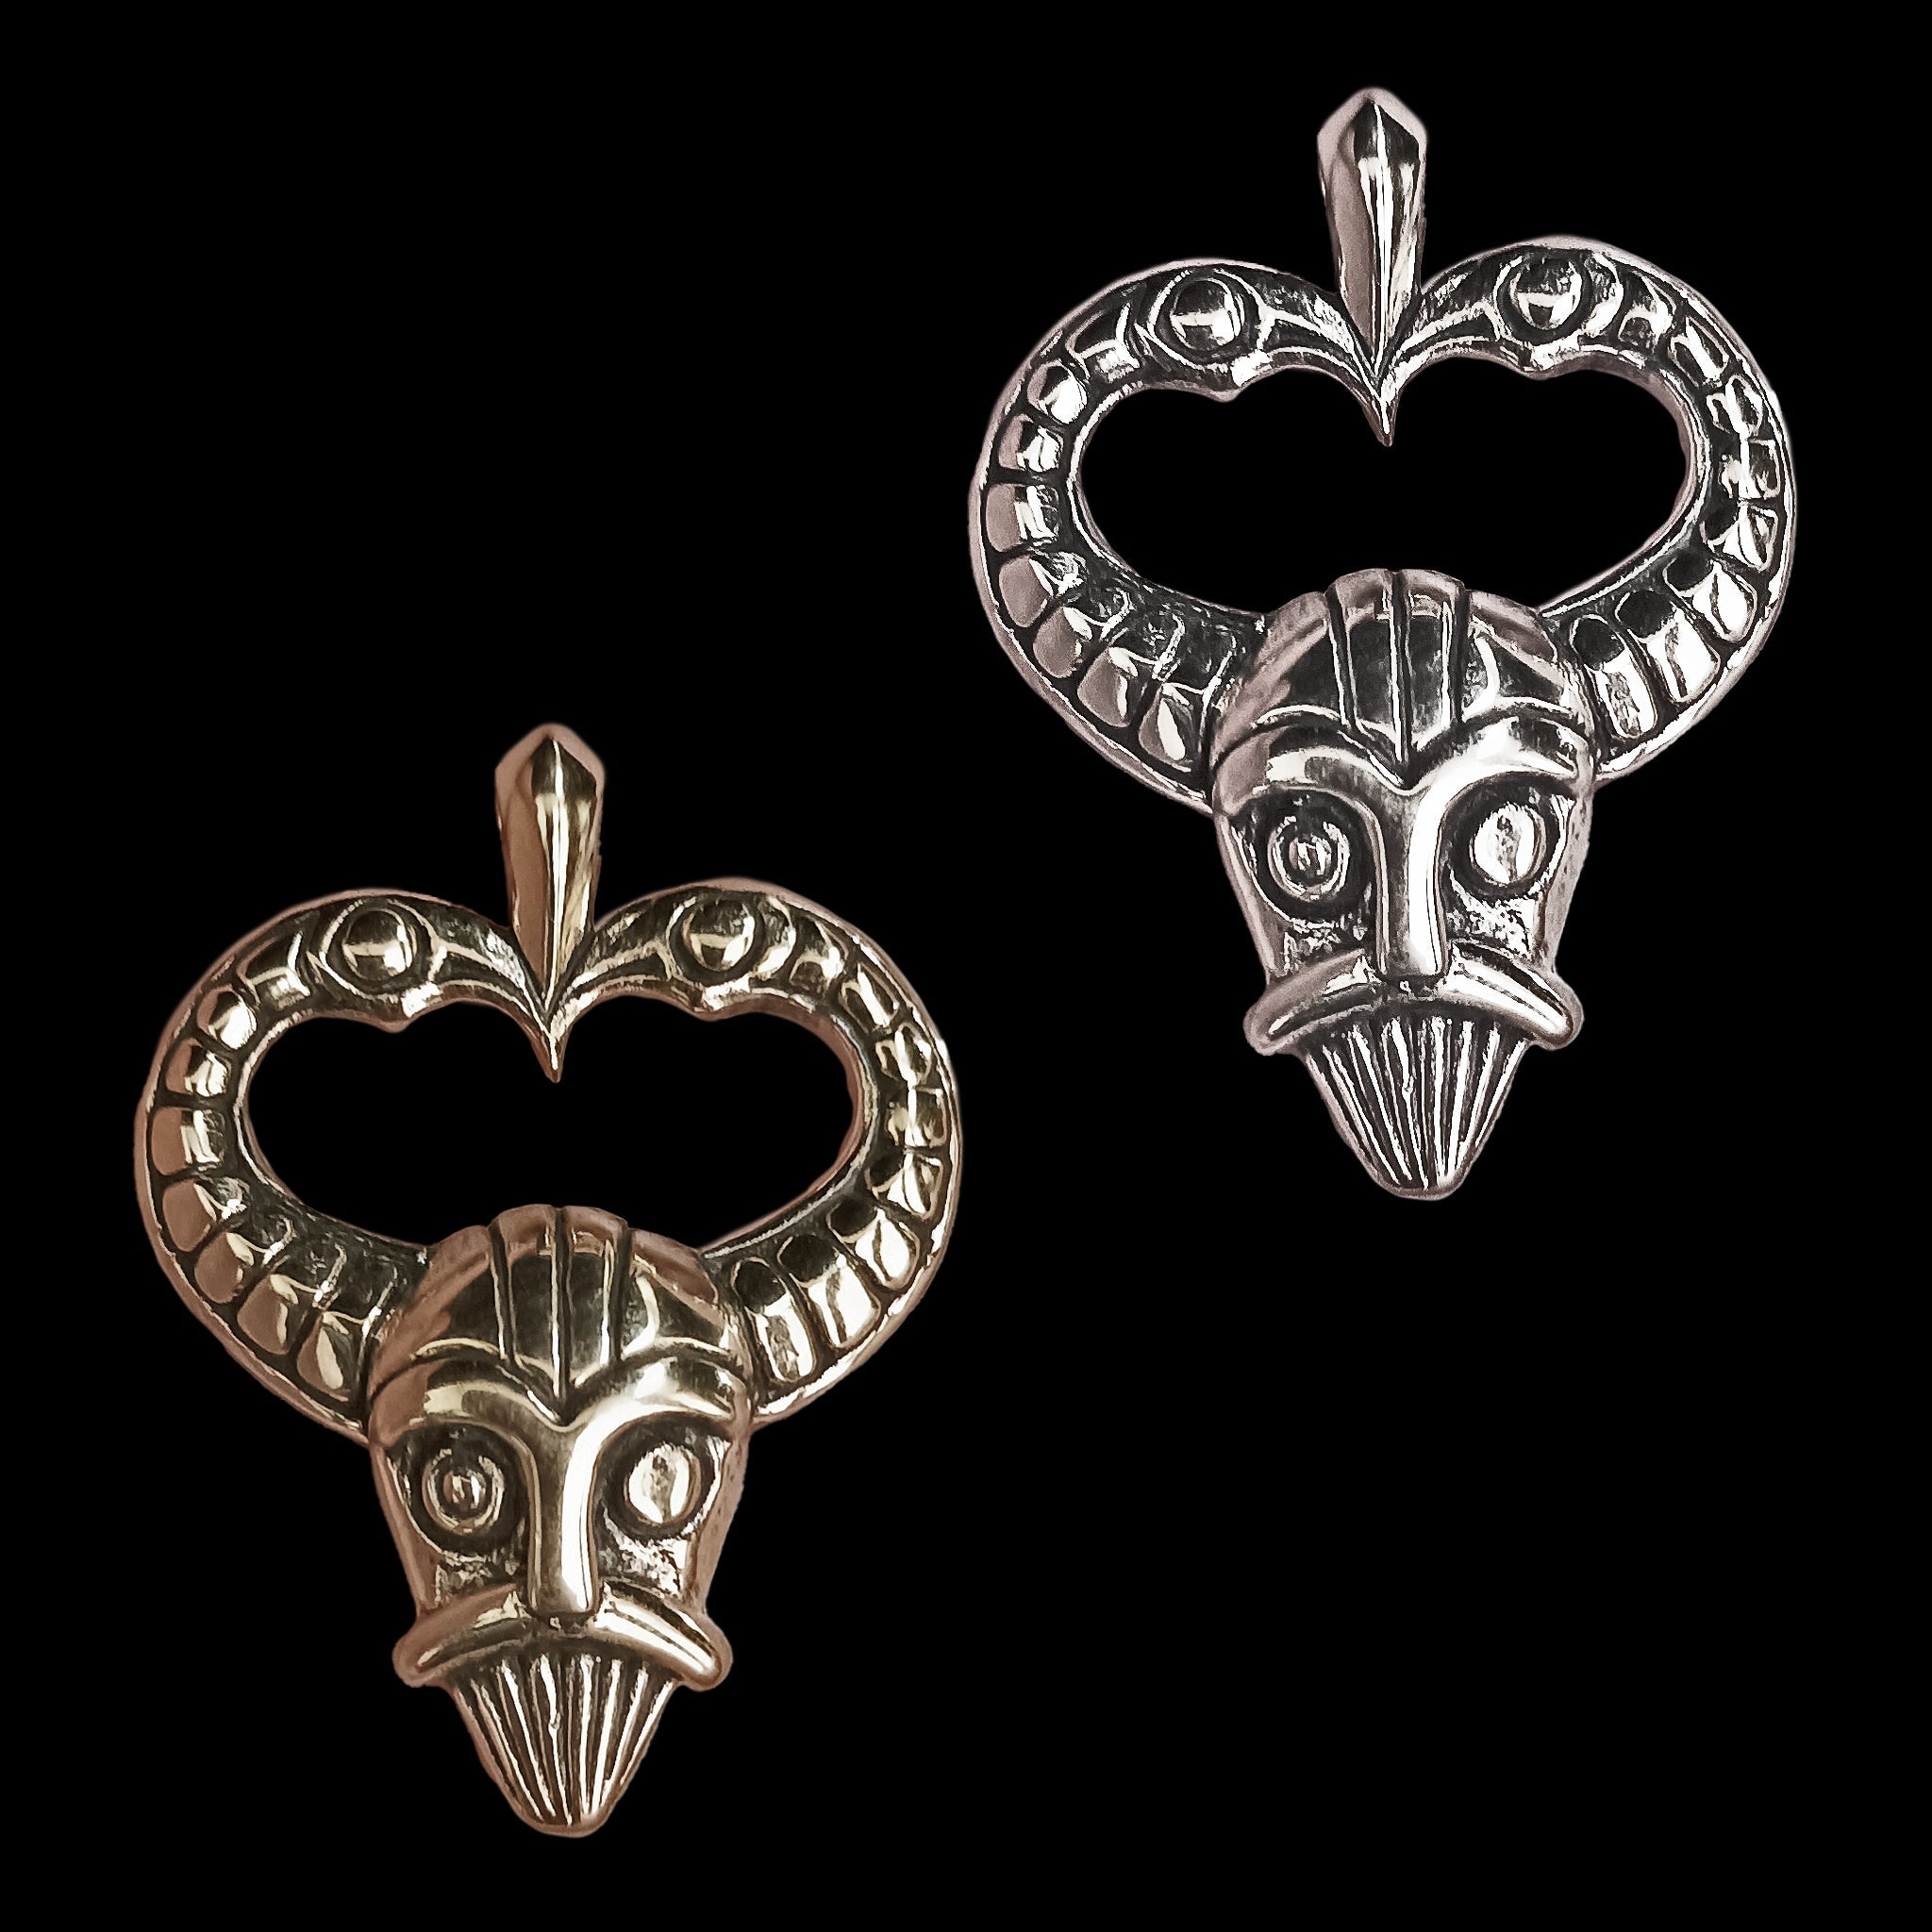 Odin Protection Pendant in Sterling Silver or - Viking Jewelry